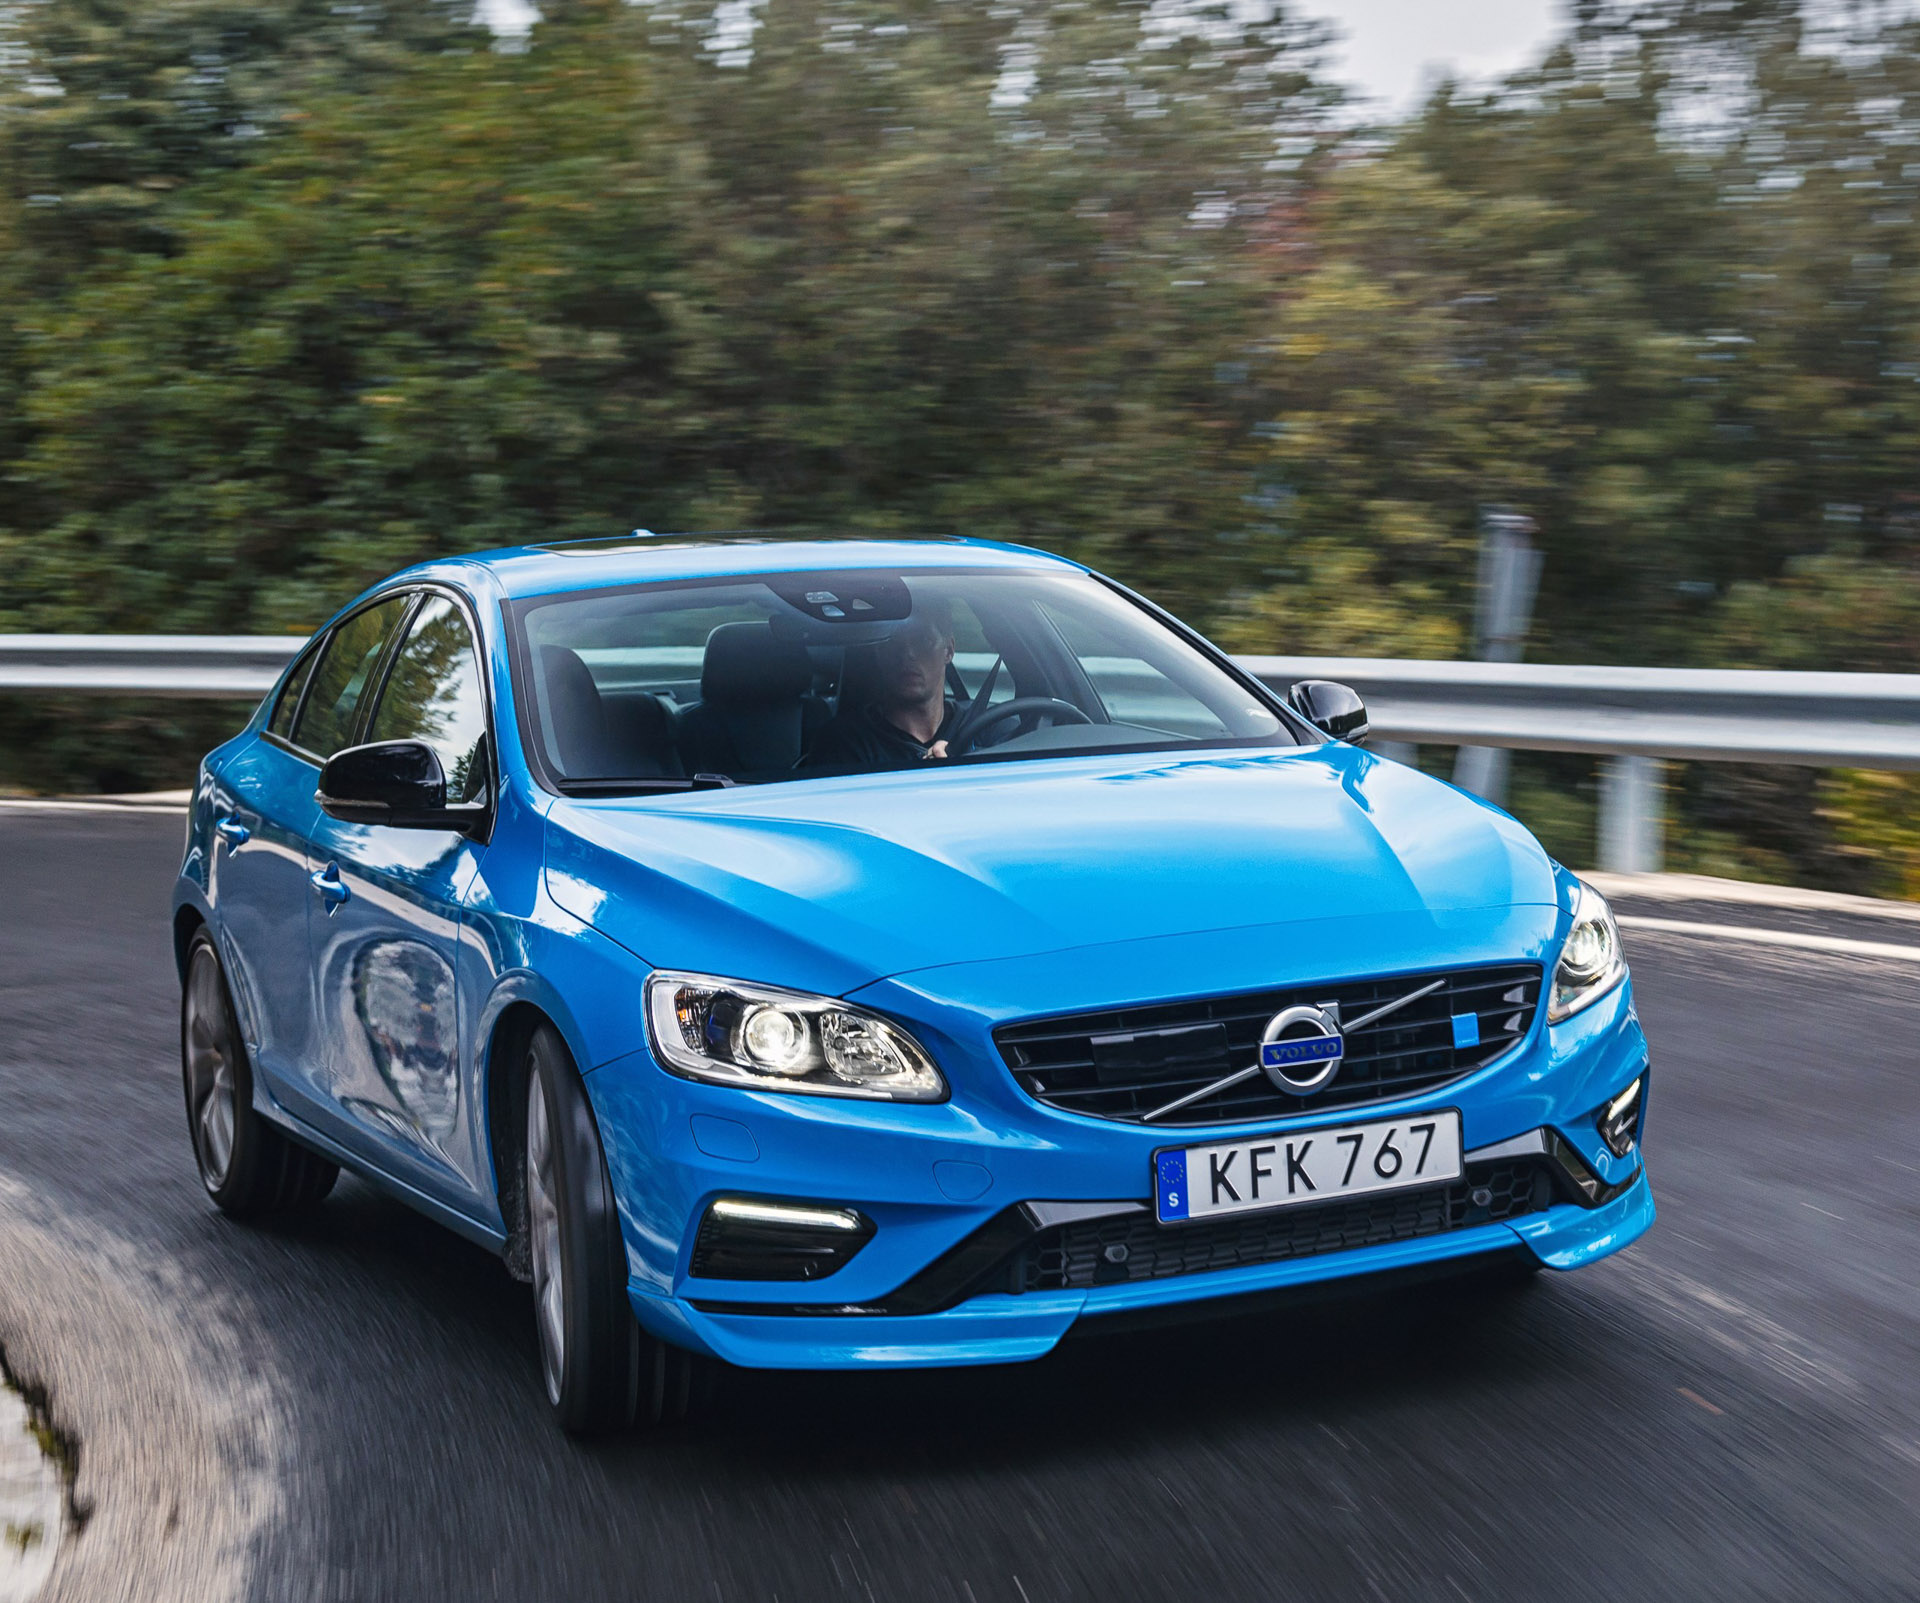 Volvo to launch its S60 Polestar in India soon